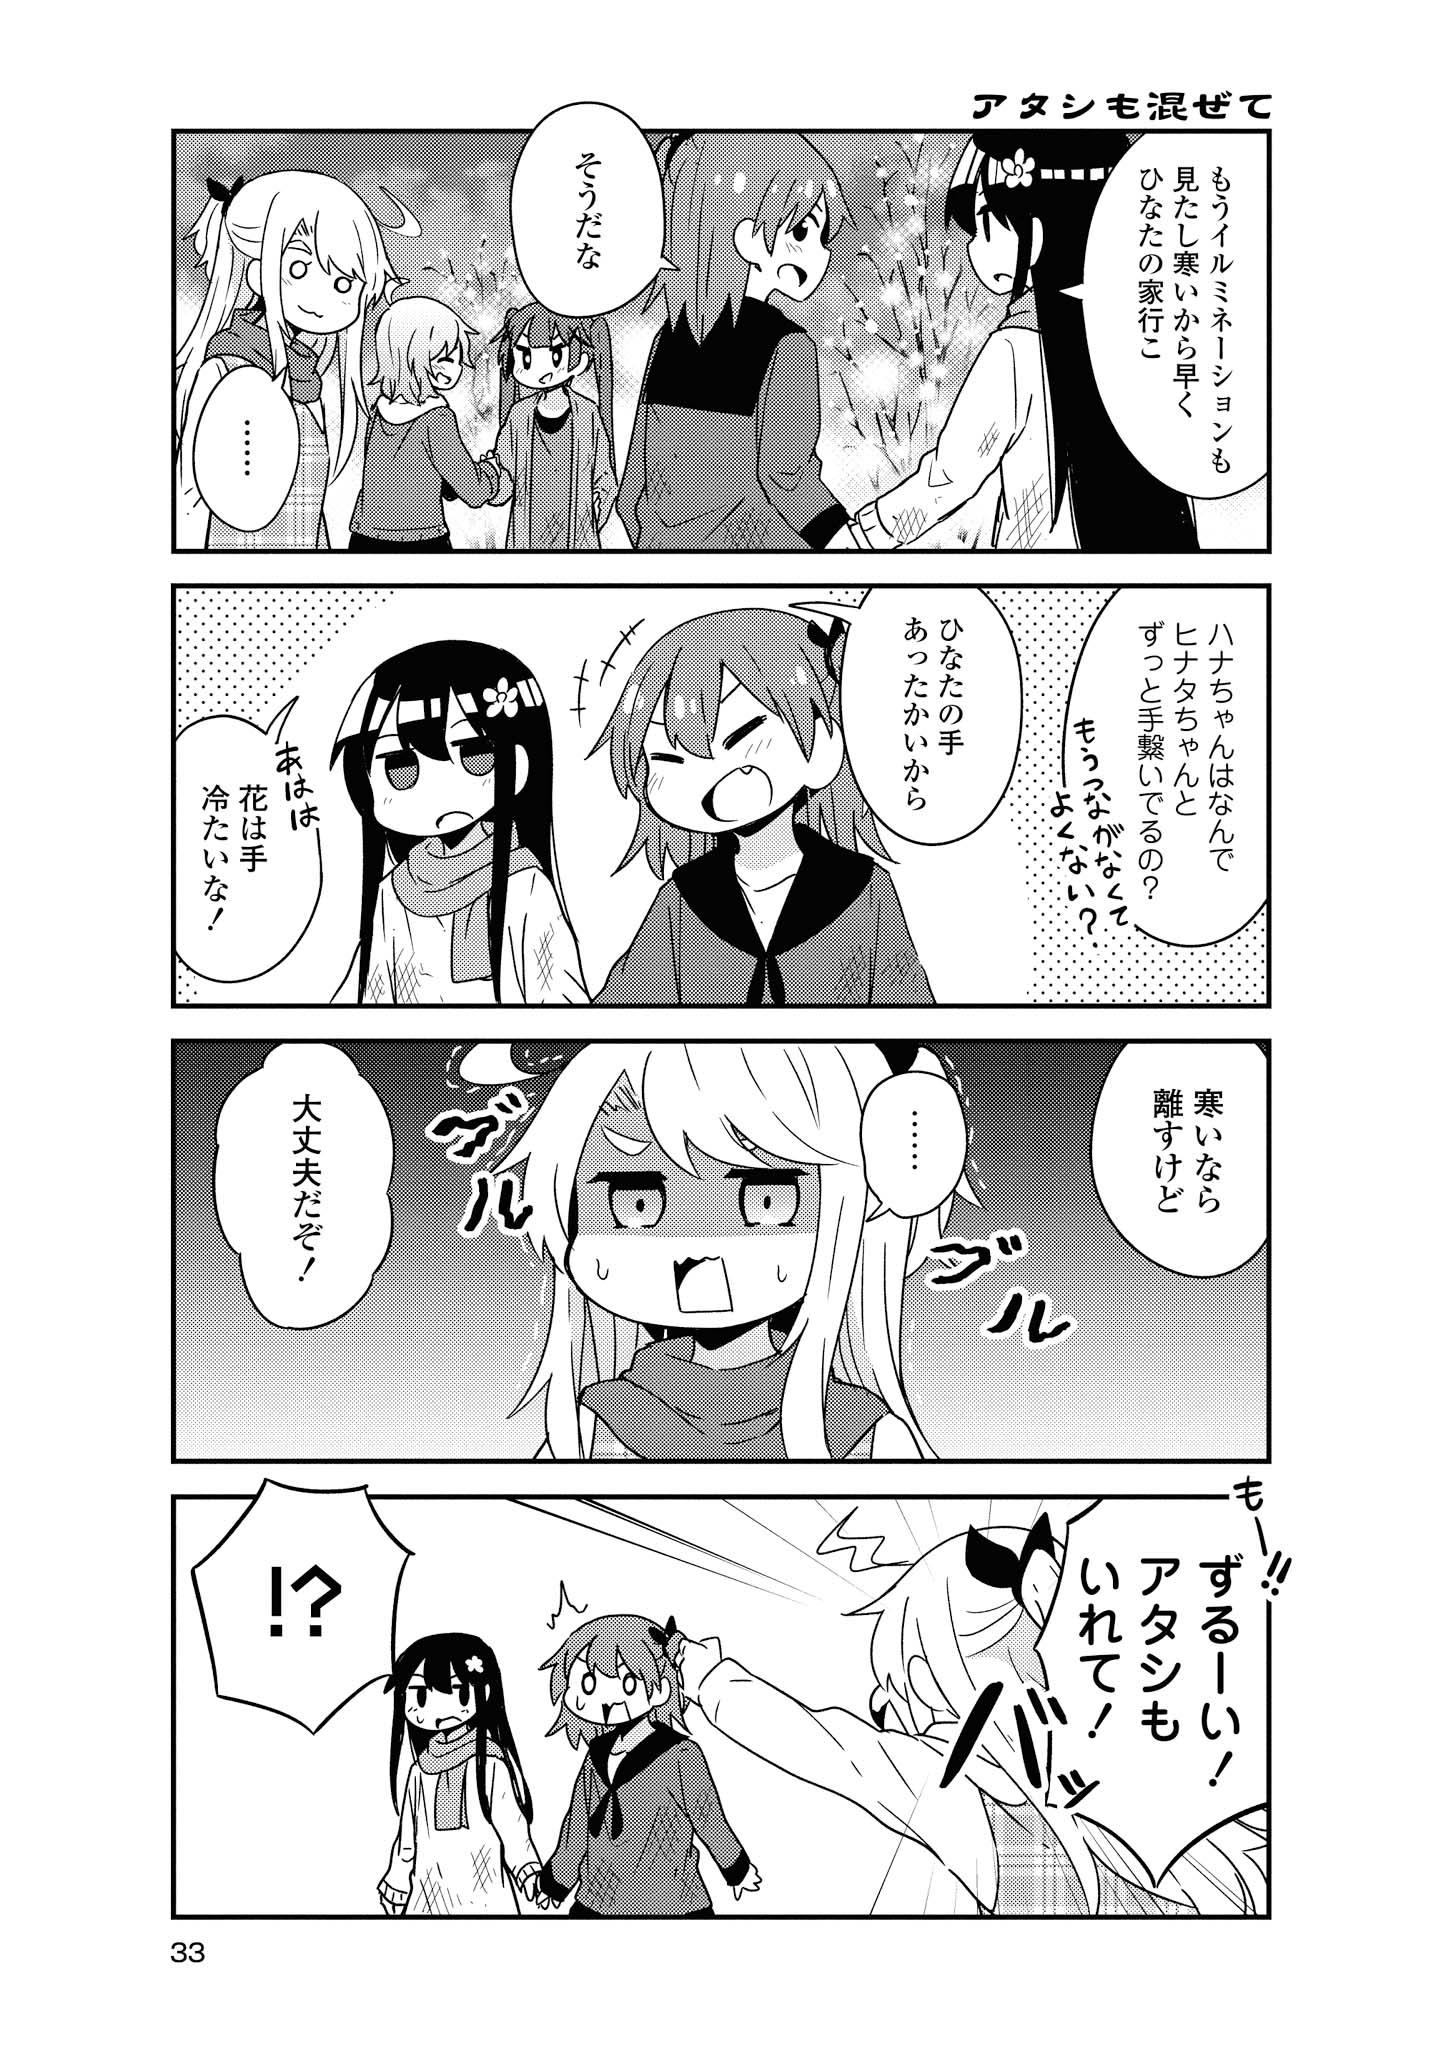 Wataten! An Angel Flew Down to Me 私に天使が舞い降りた！ 第45話 - Page 9